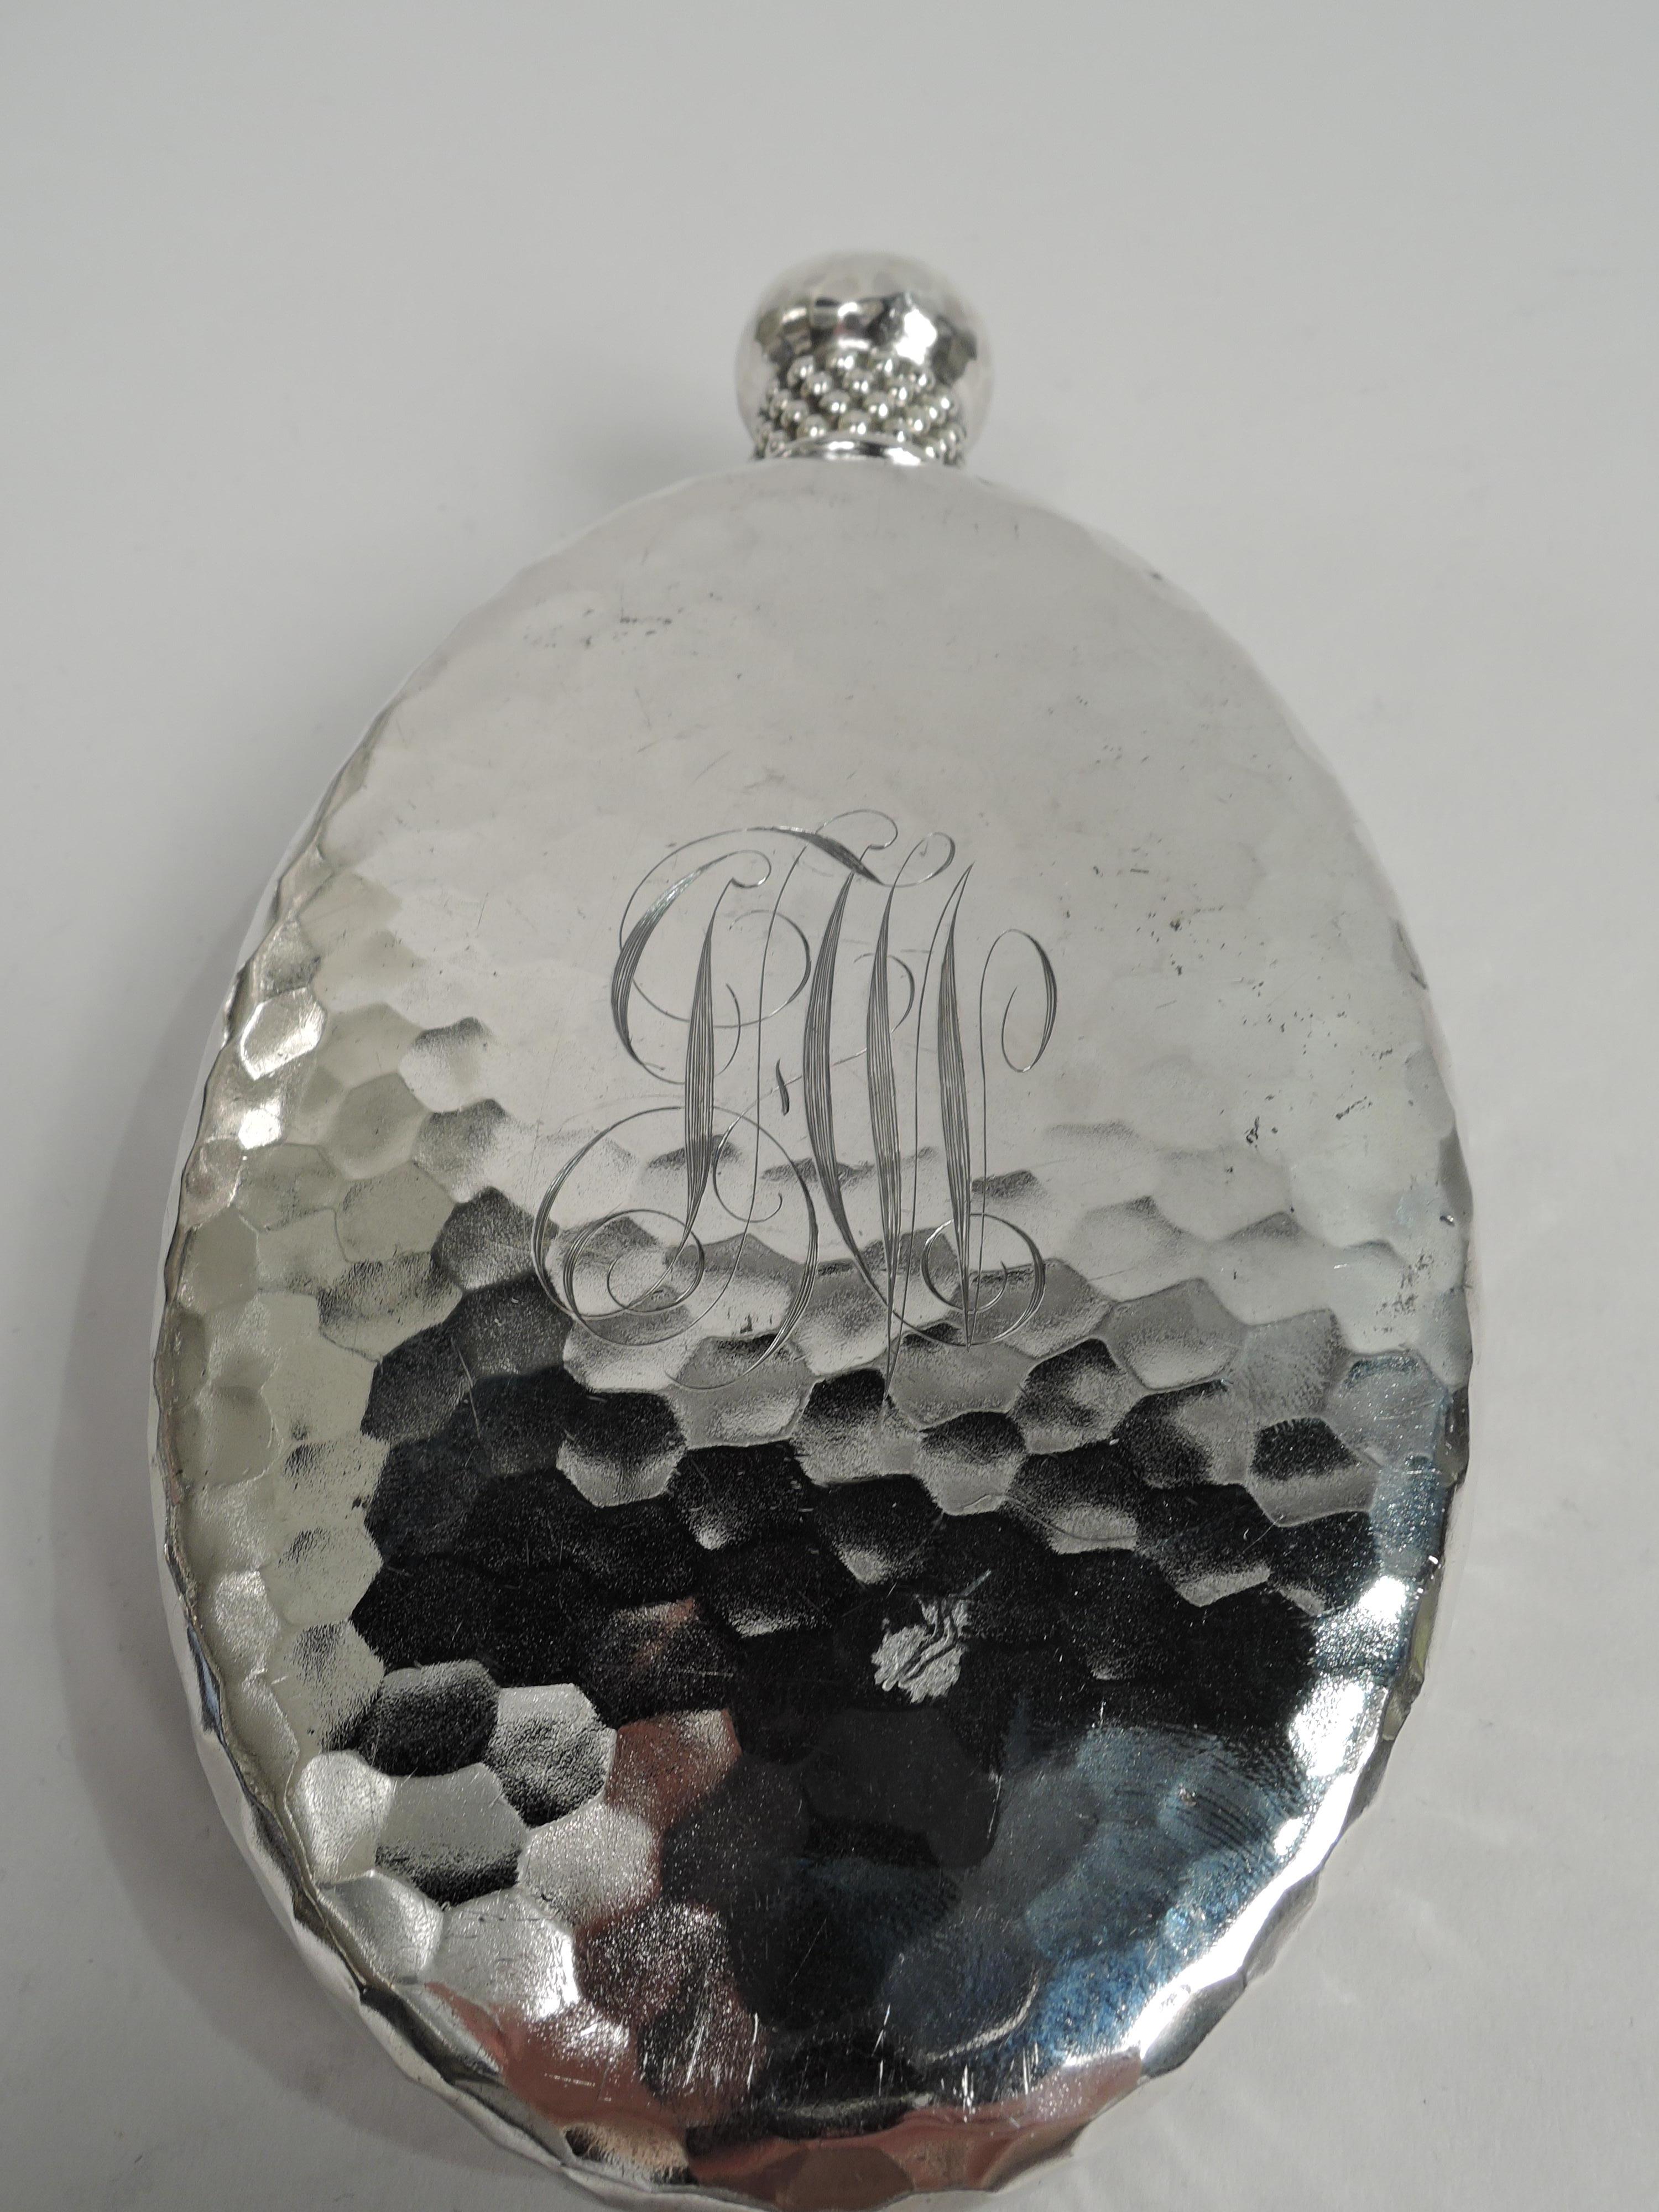 Rare sterling silver flask. Made by Tiffany & Co. in New York, ca 1882. Oval with curved sides and flat front and back. On front is seahorse with ribbed body and volute-scroll tail floating amongst seagrass. Back engraved with interlaced script